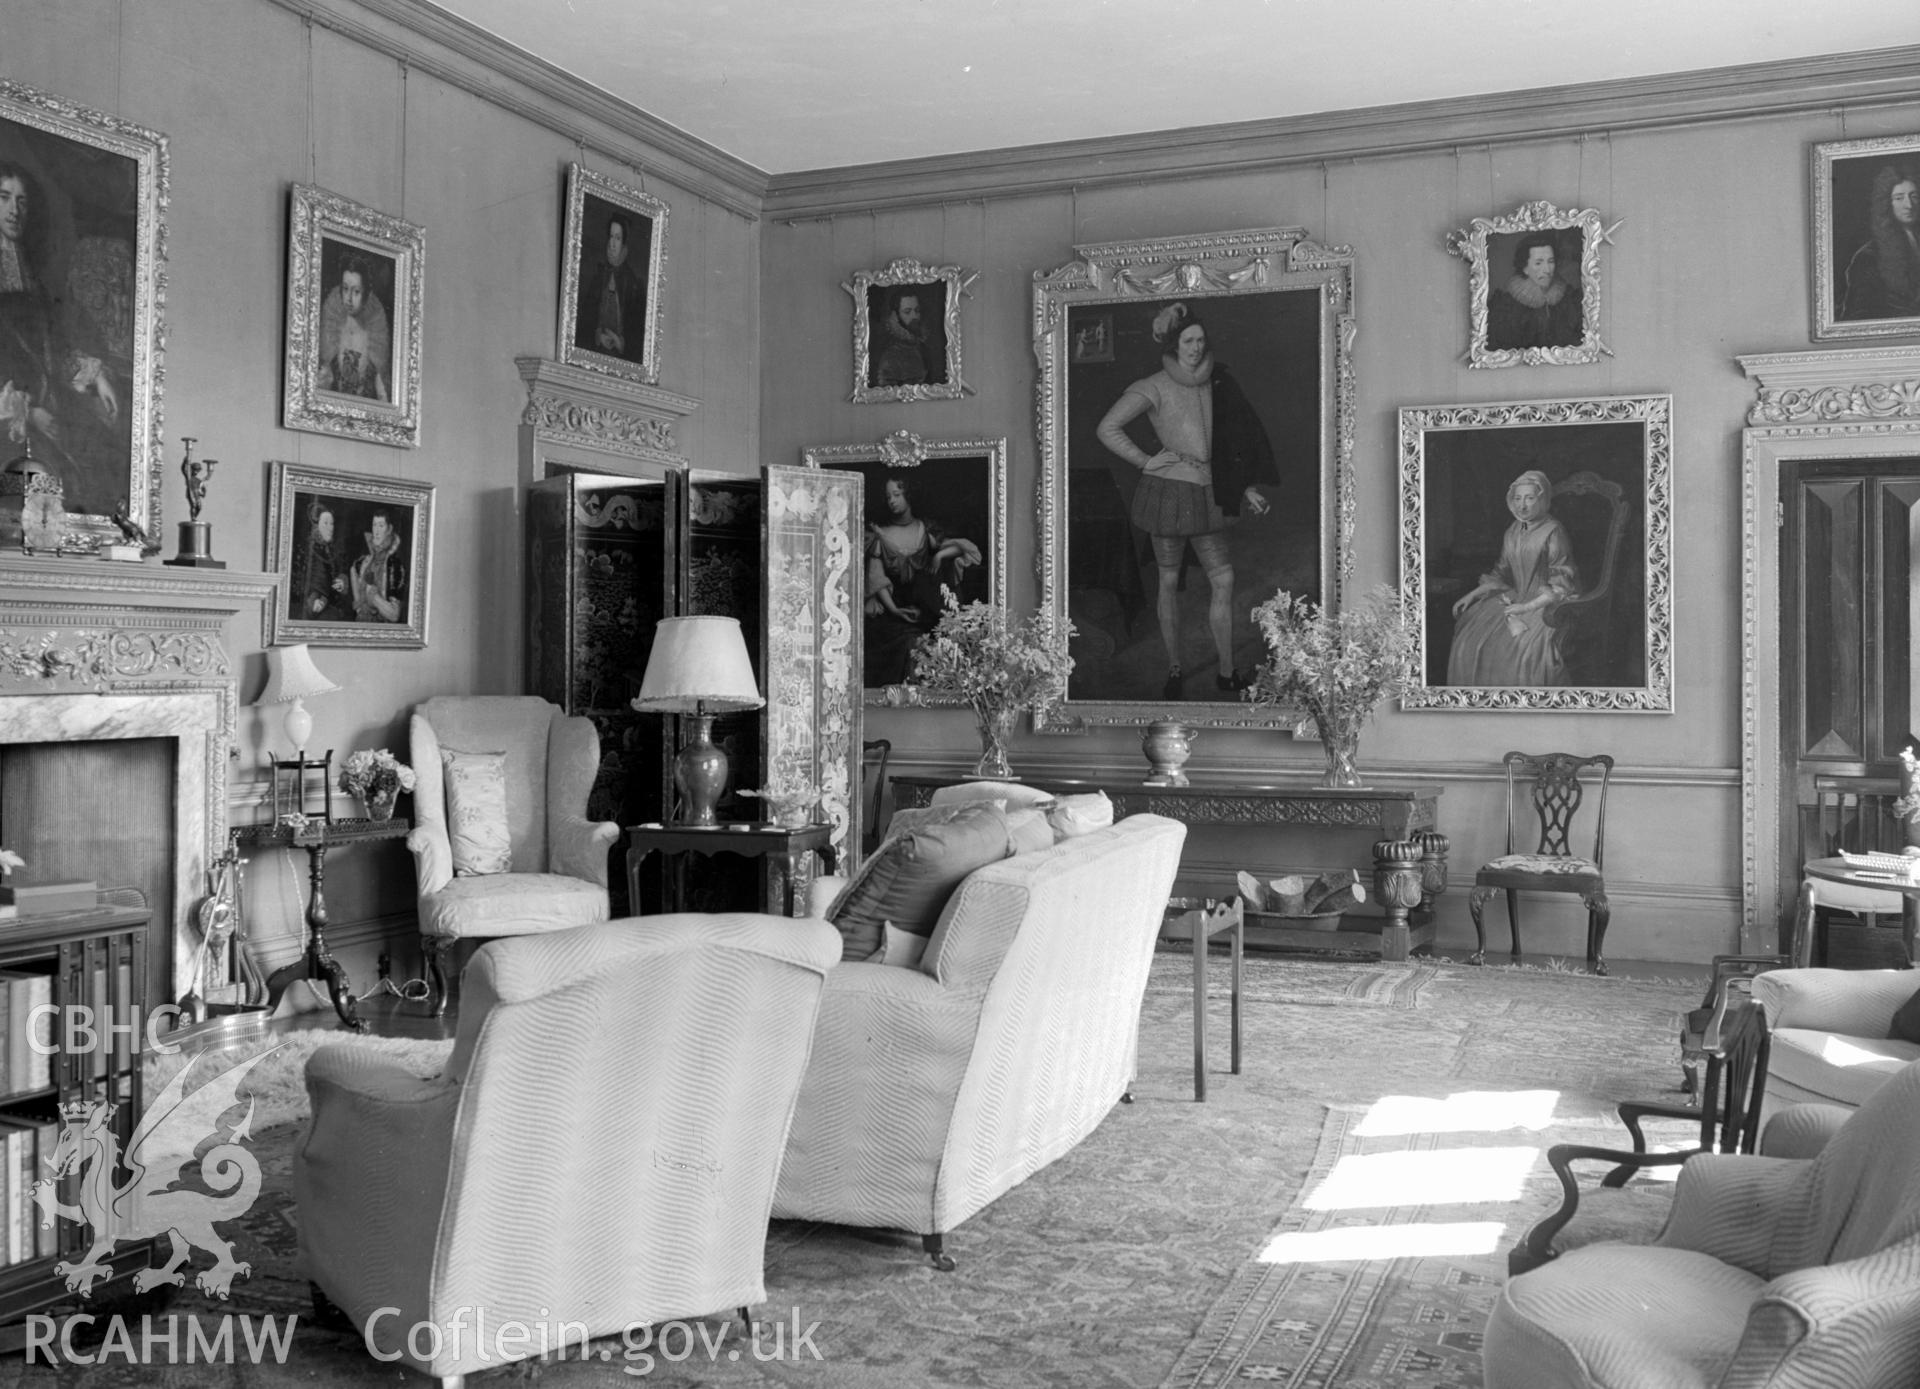 The drawing room with a fireplace and decorative edges around the doorframes.